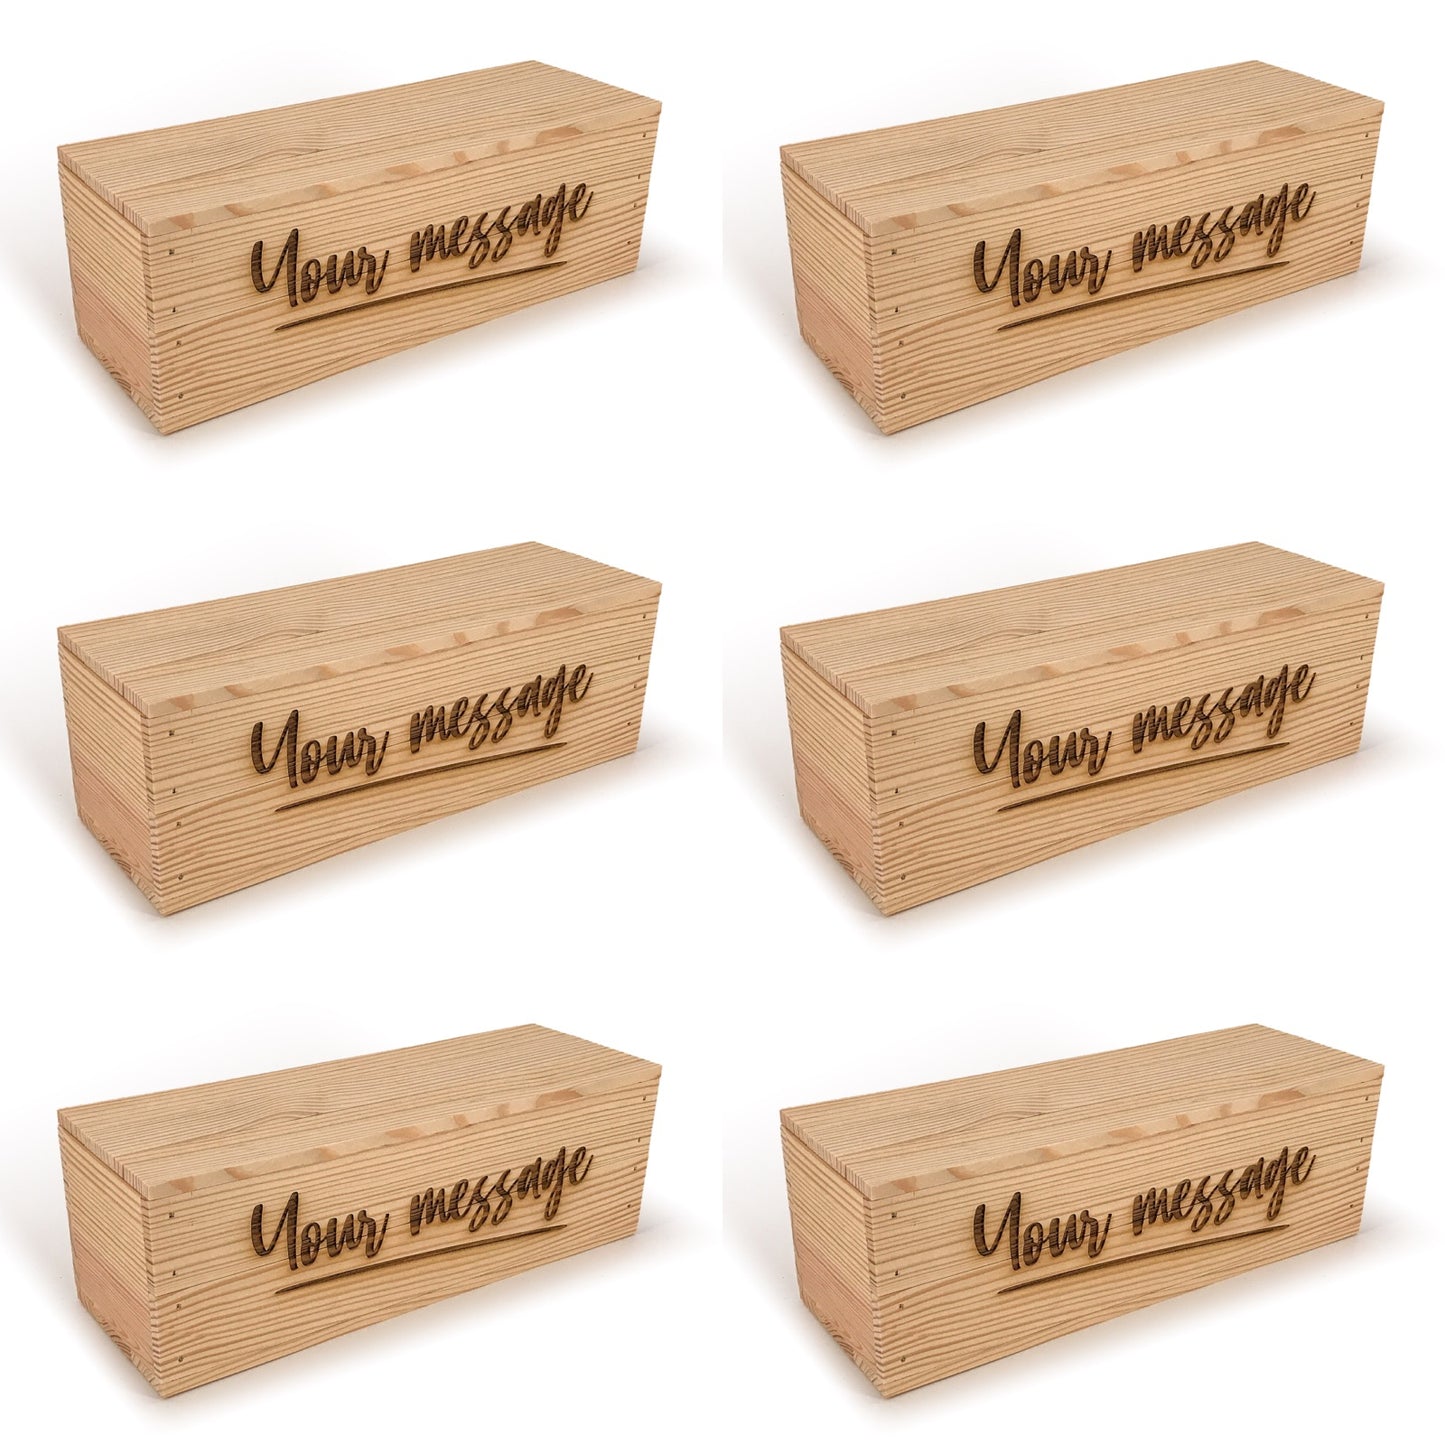 6 Single Bottle Wine Crate Box with Lid and Custom Message 14x4.5x4.5, 6-WB-14-4.5-4.5-ST-NW-LL,  12-WB-14-4.5-4.5-ST-NW-LL,  24-WB-14-4.5-4.5-ST-NW-LL,  48-WB-14-4.5-4.5-ST-NW-LL,  96-WB-14-4.5-4.5-ST-NW-LL